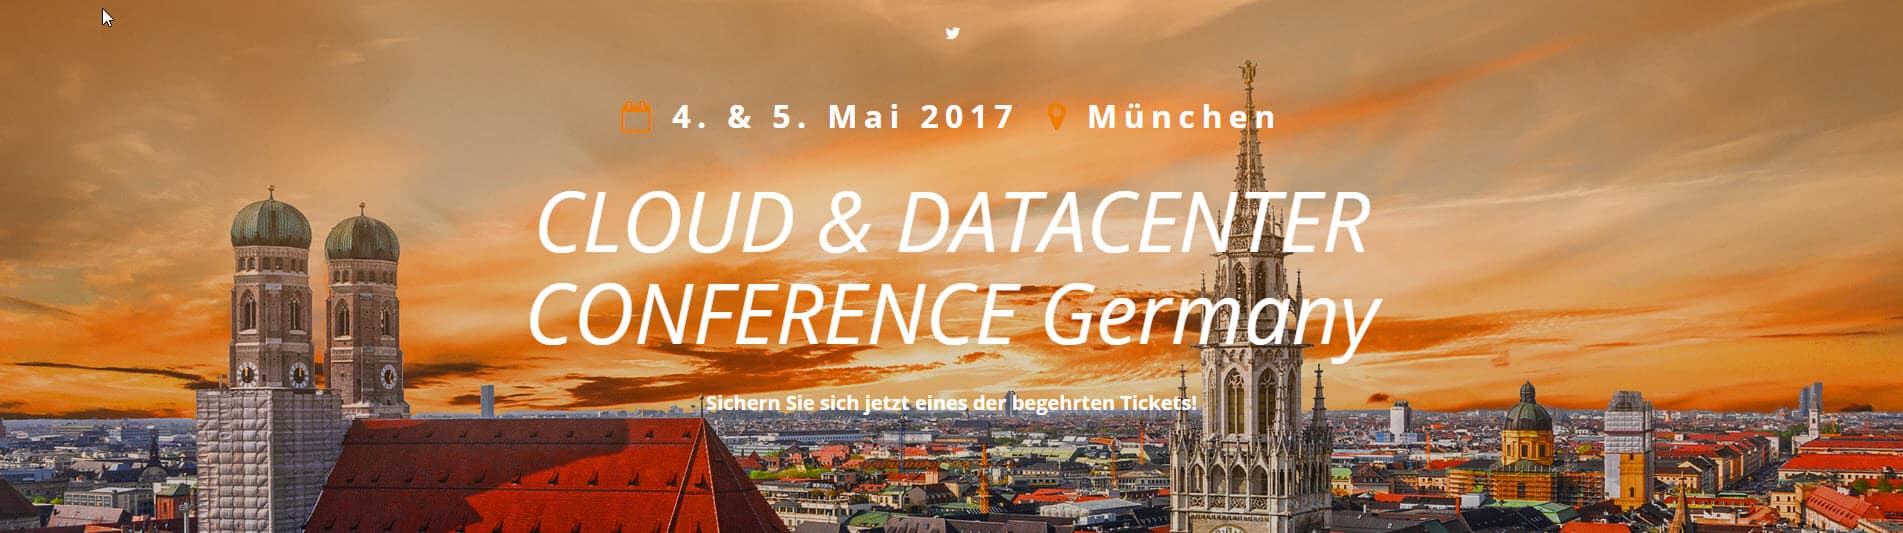 Cloud & Datacenter Conference Germany 2017